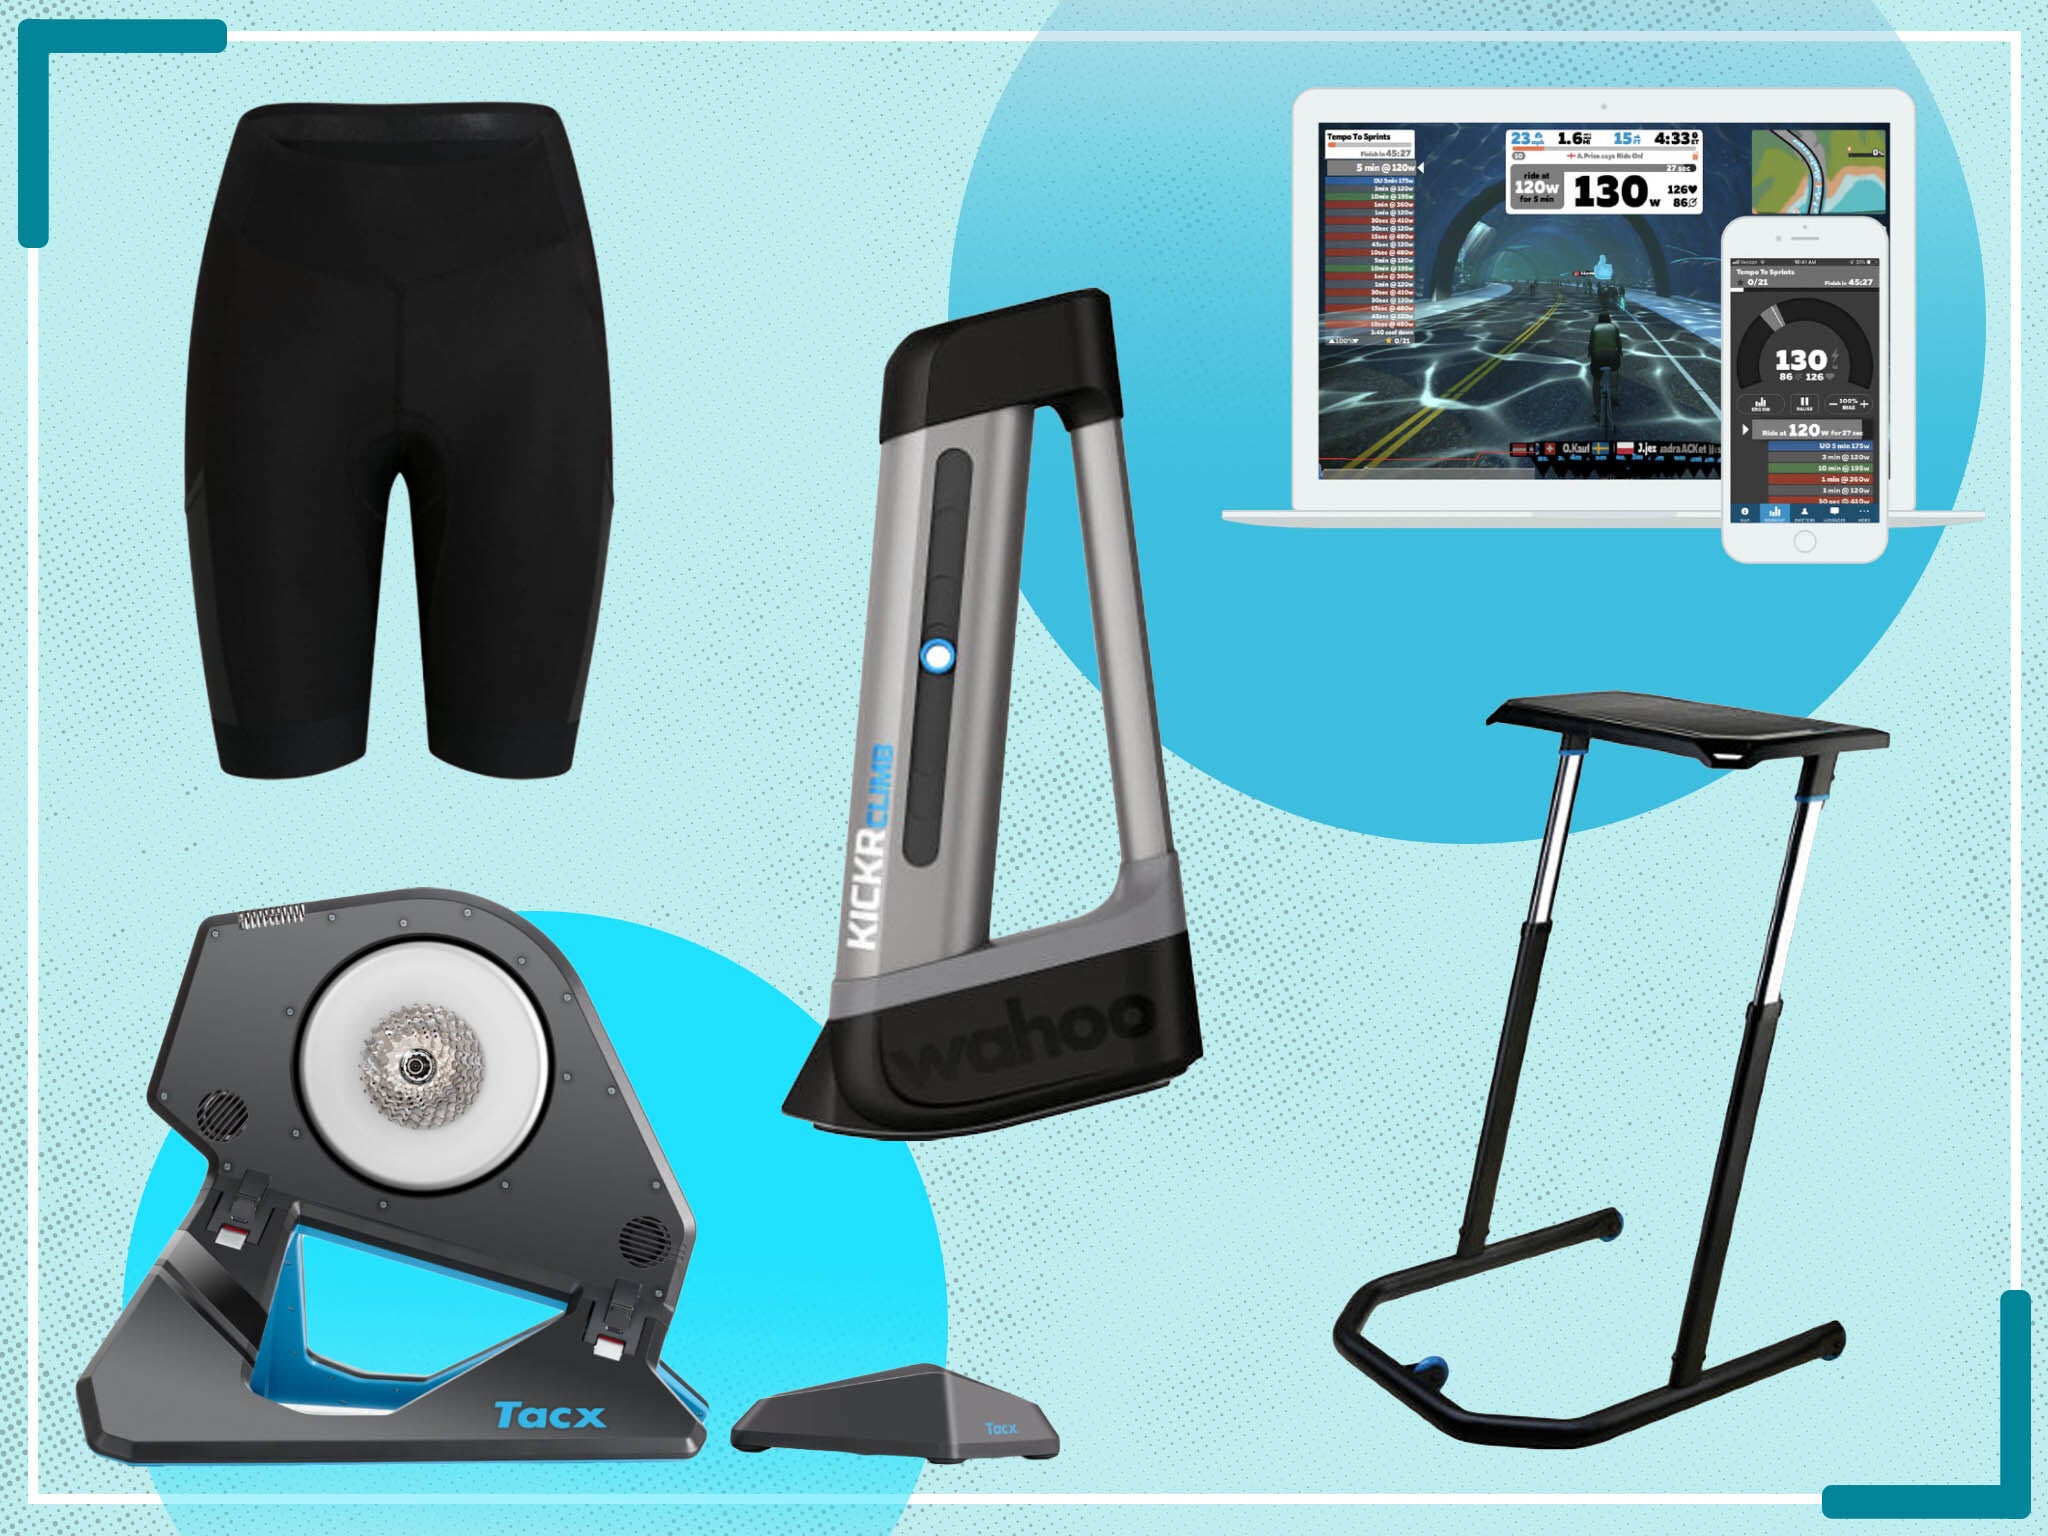 Discover turbo and smart trainers, kit, hardware, accessories and more